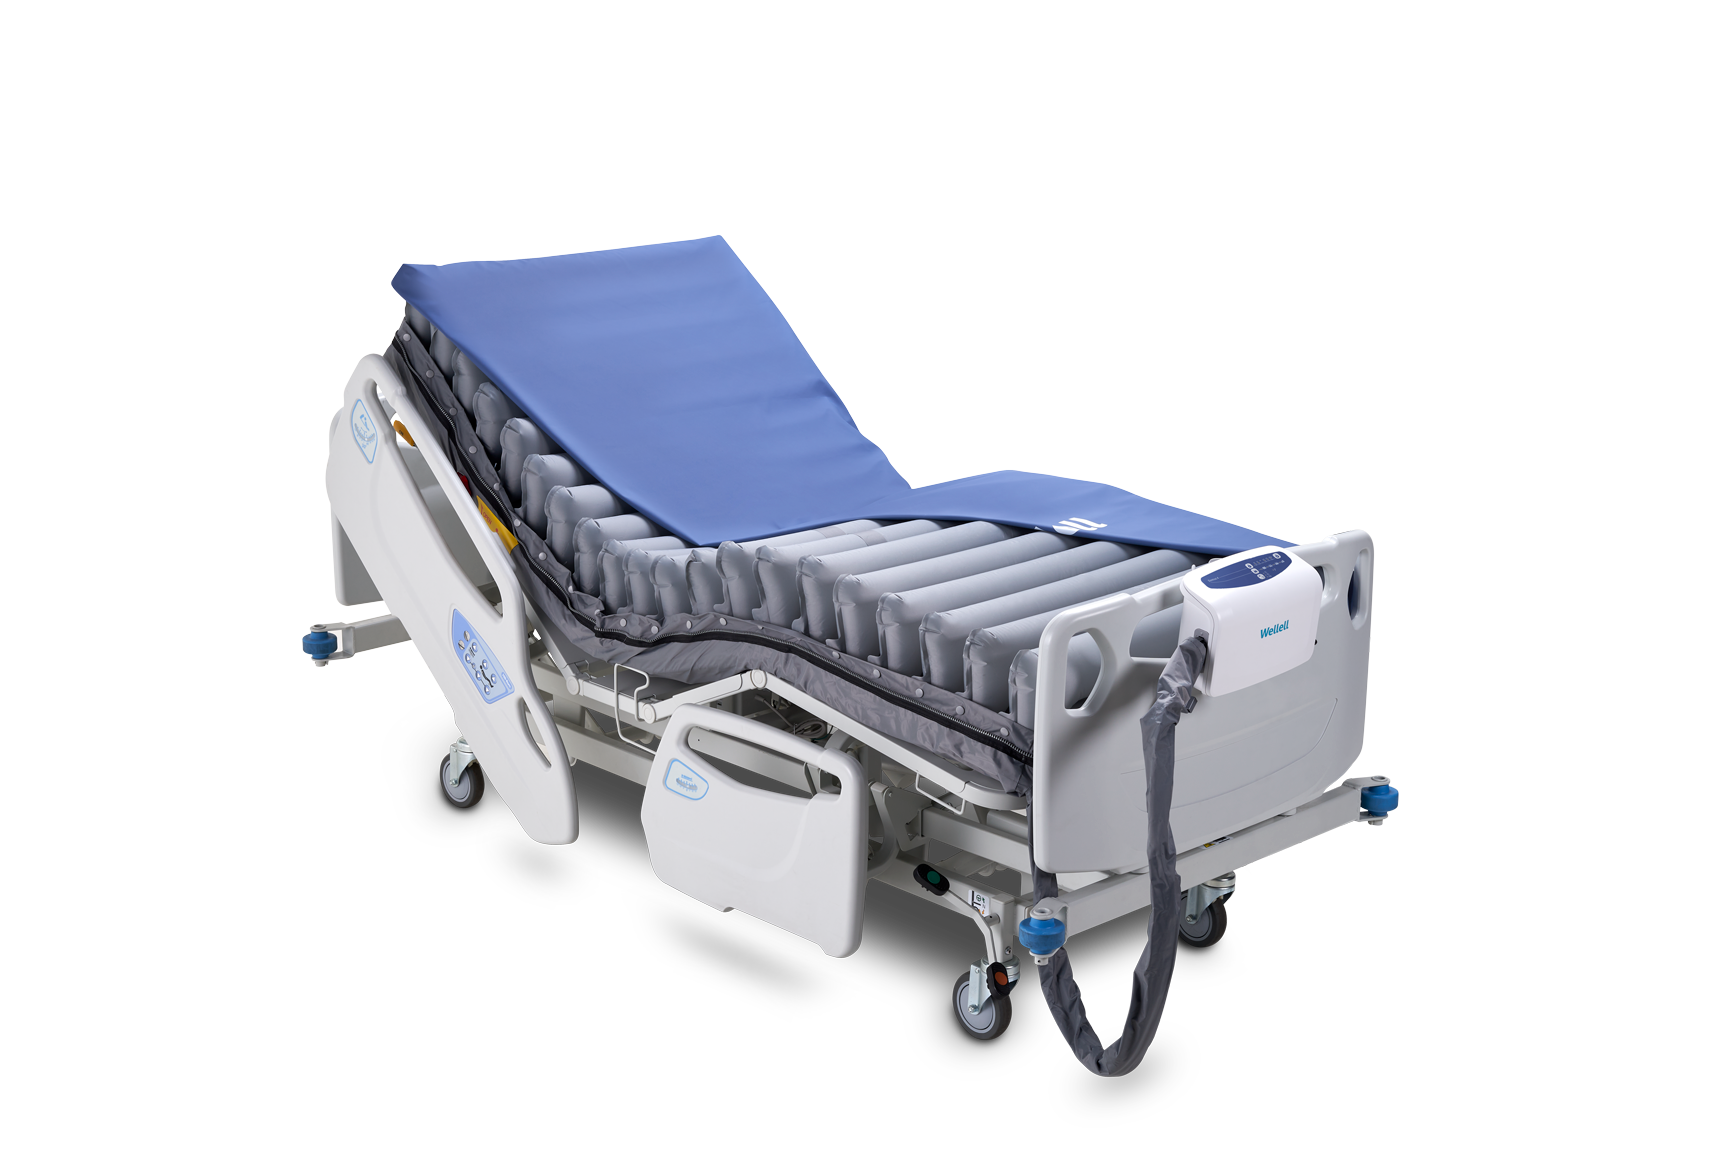 Domus 4 - Medical Bed - US Wellell